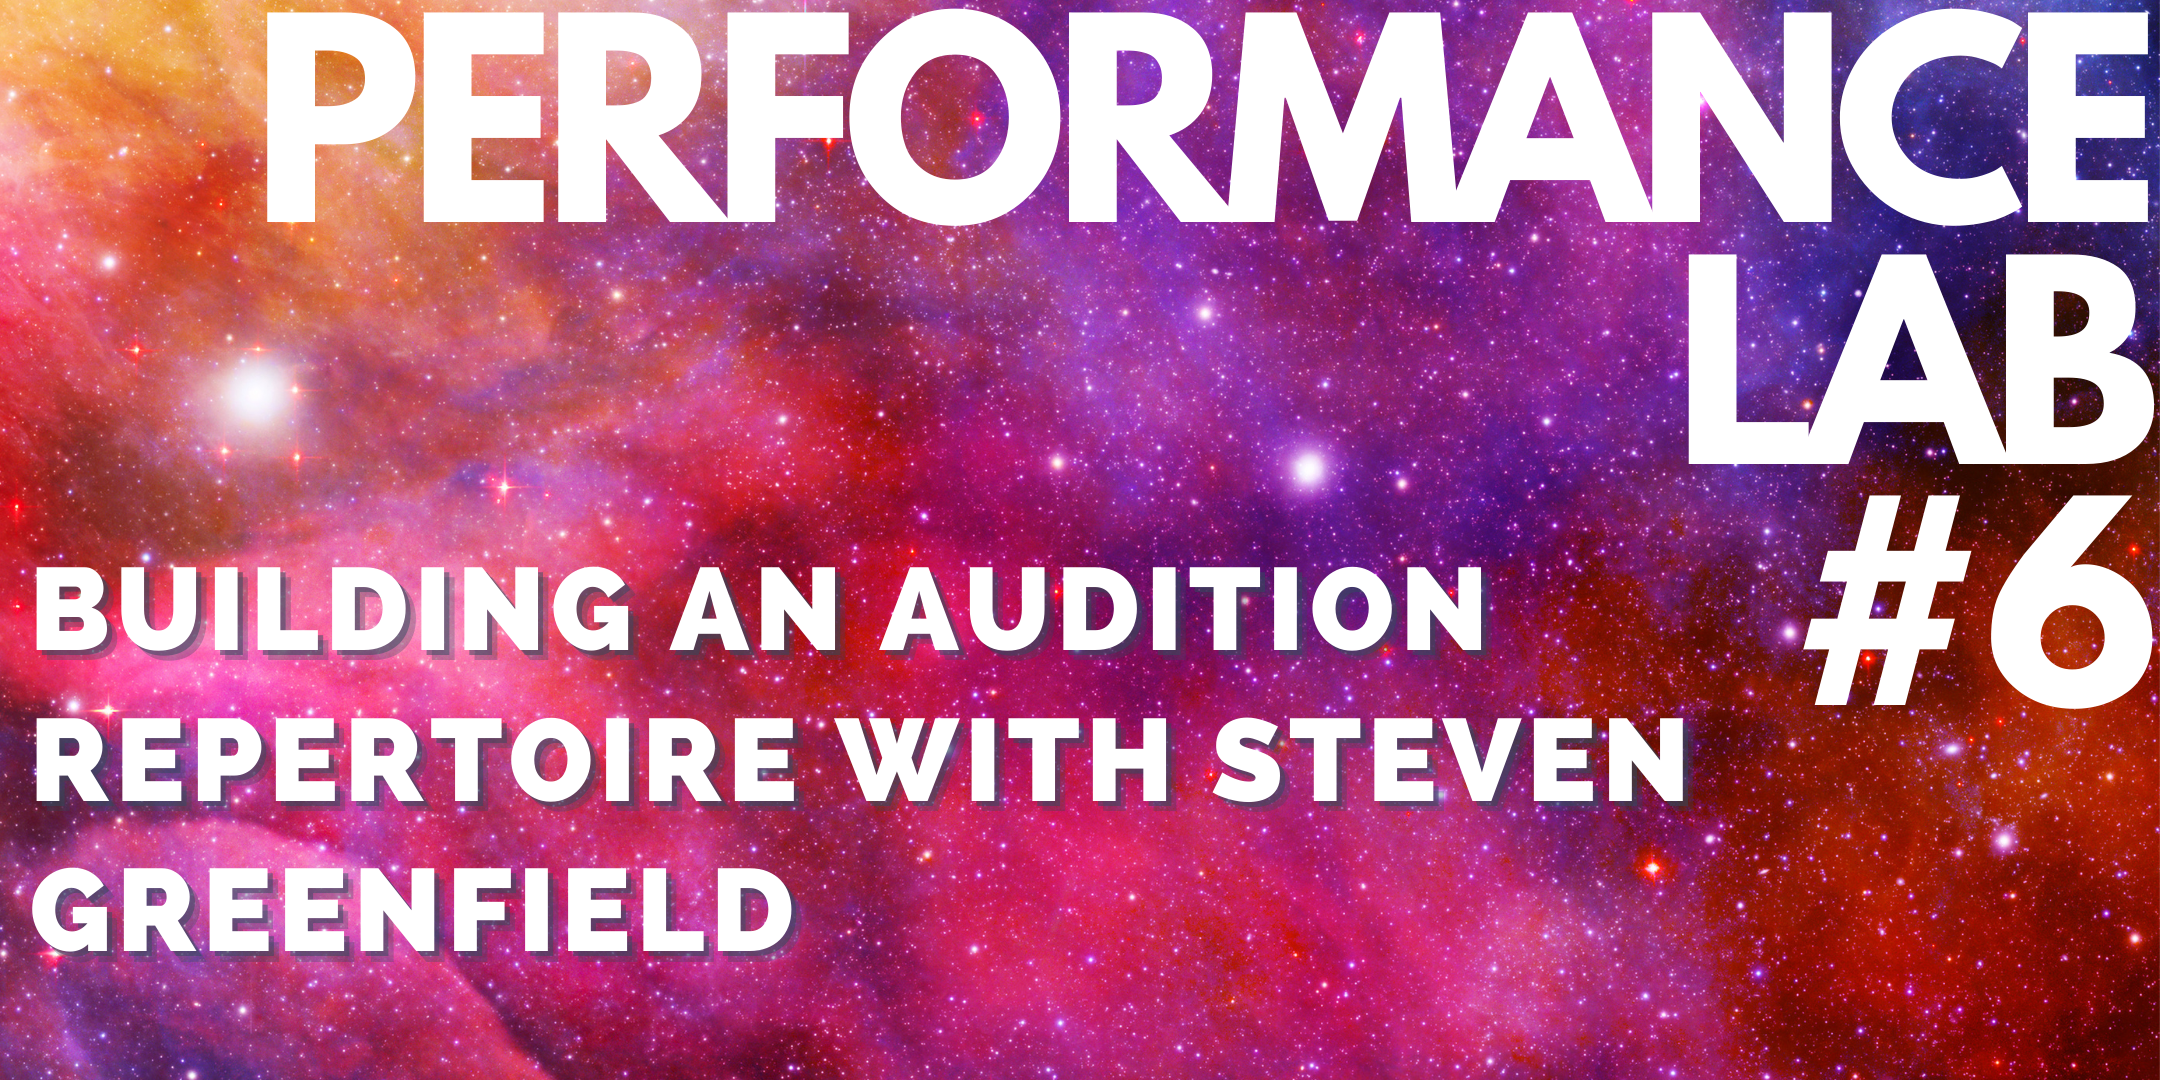 Performance Lab #6: Building An Audition Repertoire With Steven Greenfield. Text is layered on a background of a bright pink, orange and red galaxy sprinkled with stars.